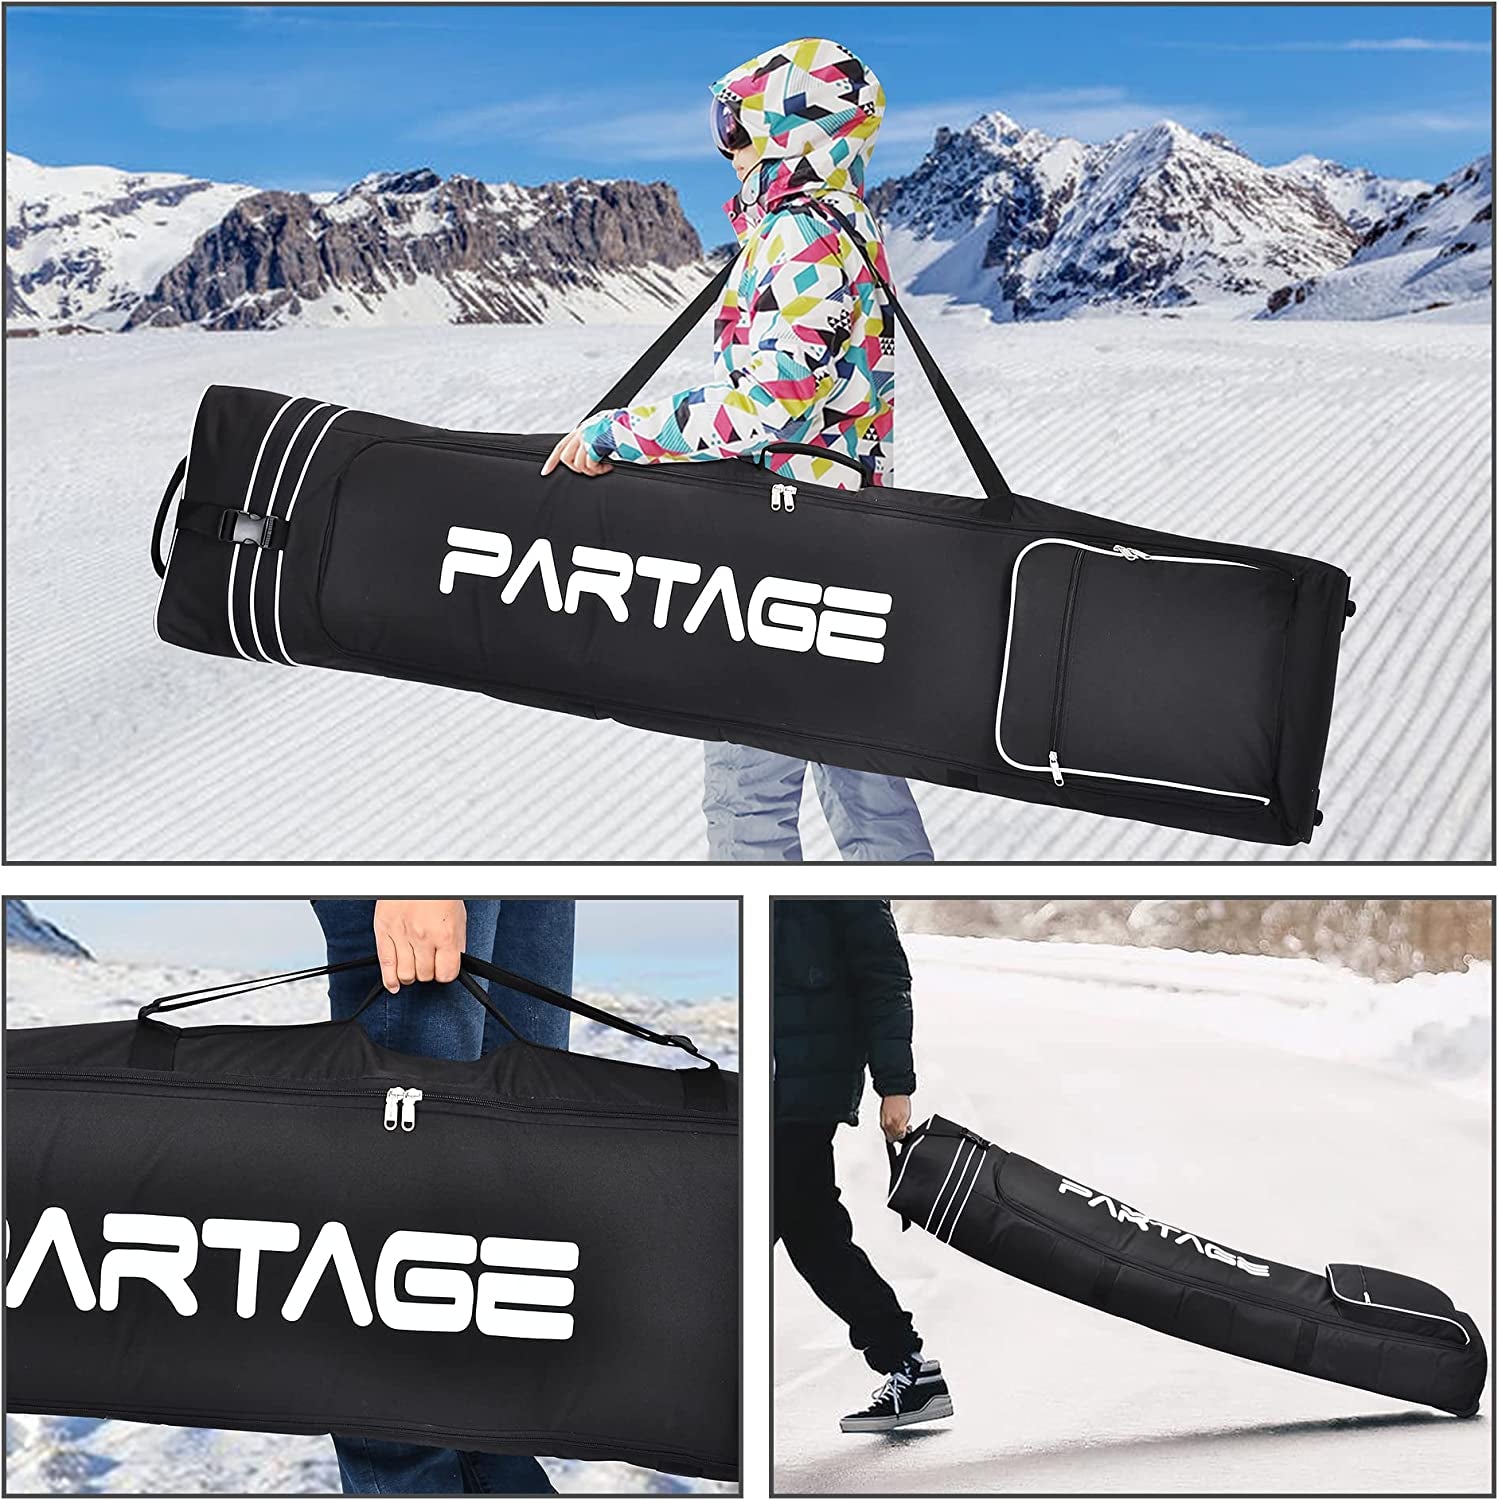 Partage Snowboard Bag with Wheels, Snowboard Bag for Air Travel, Adjustable Length up to 170 Cm, 600D Waterproof Oxford -Black